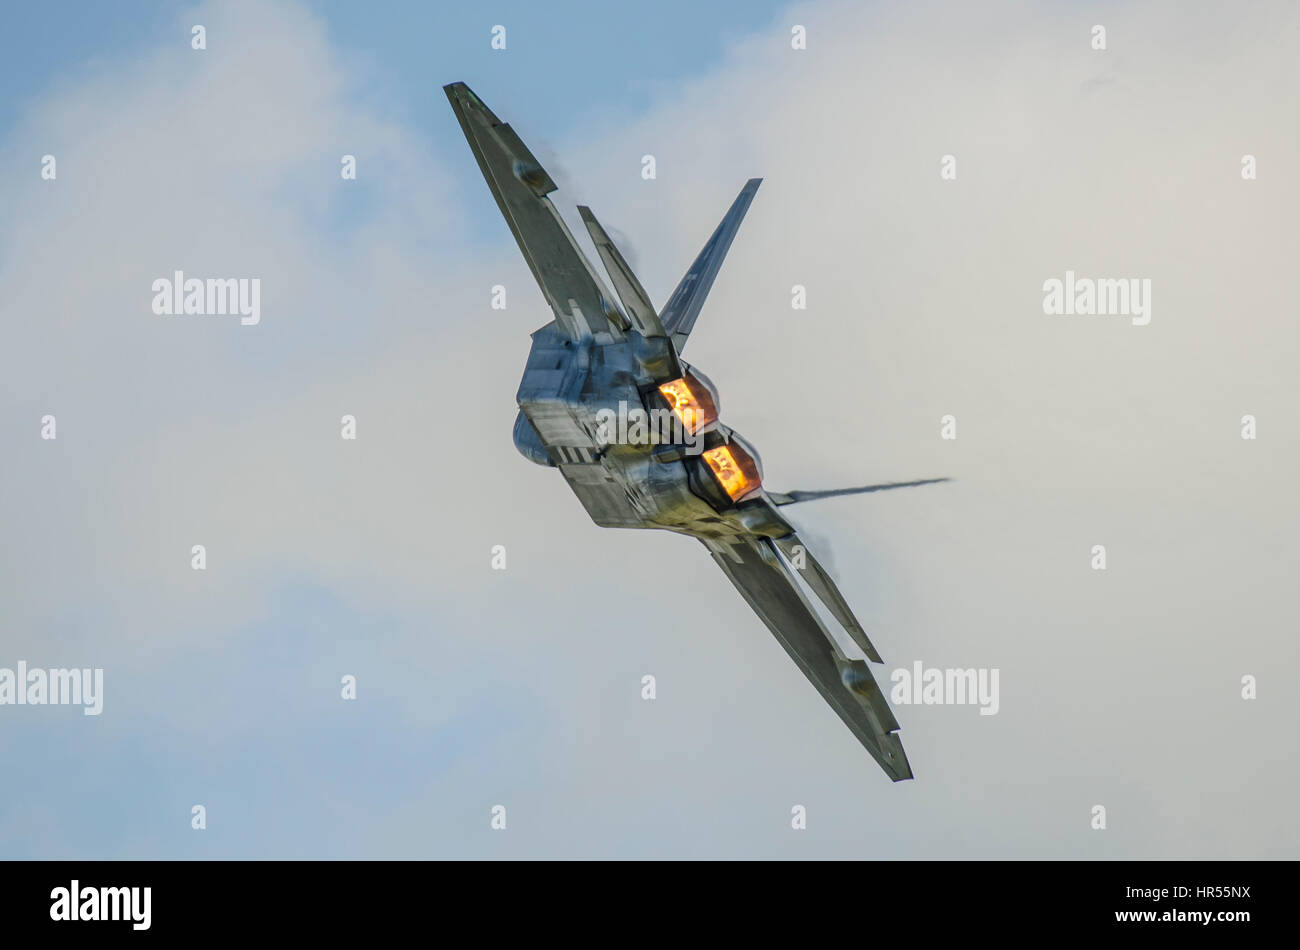 Lockheed Martin F22 Raptor stealth fighter at the Flying Legends Air Show at IWM Duxford Stock Photo